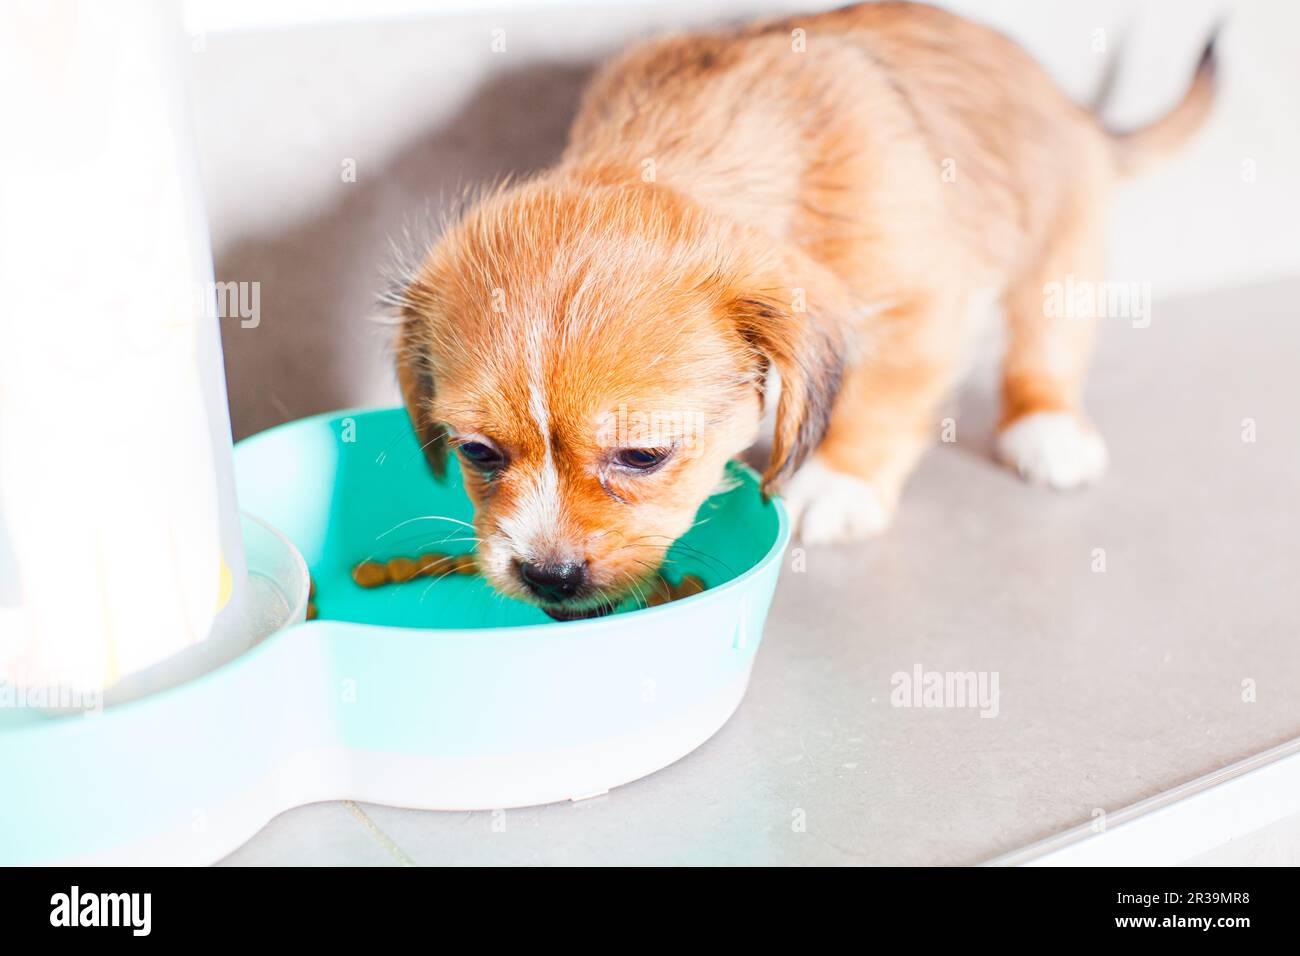 Close up puppy eating from the bowl Stock Photo